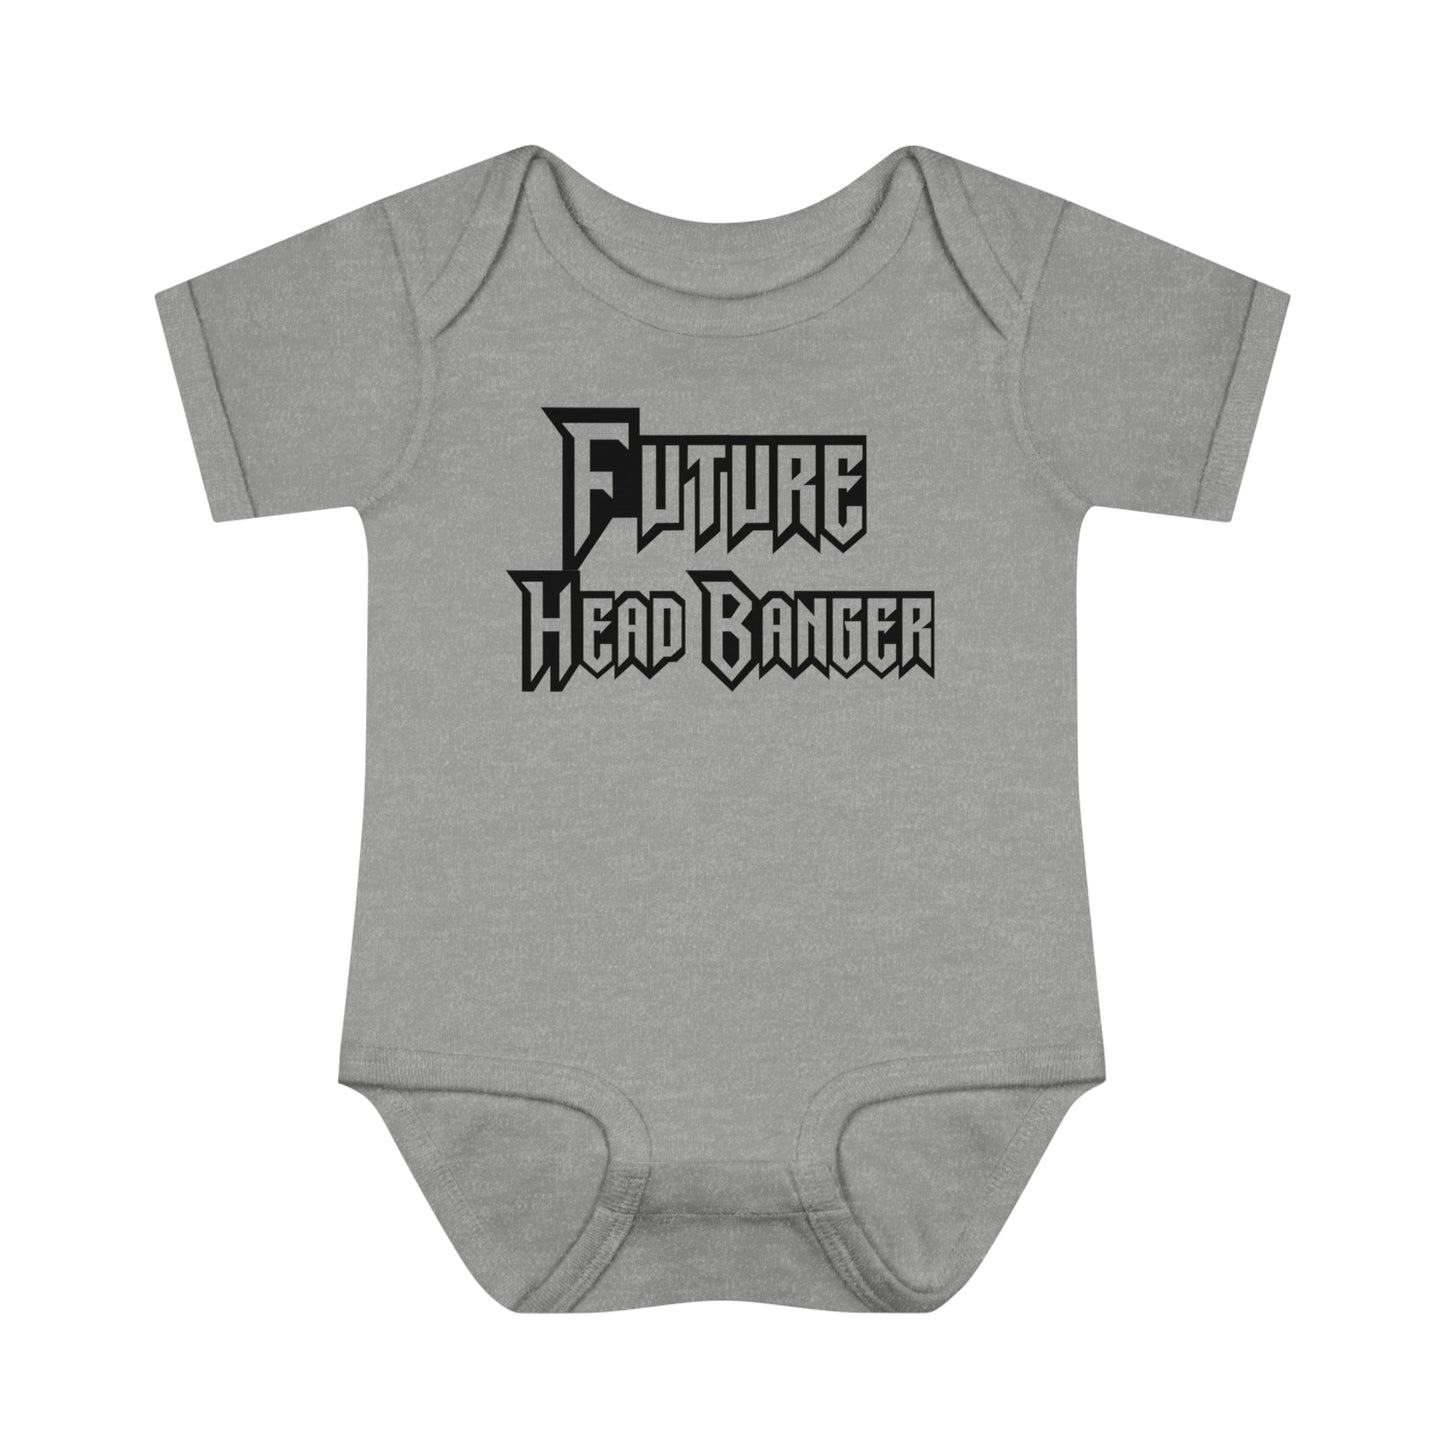 Future Head Banger Tee, Infant One Piece, Toddler Bodysuit, Rock and Roll T-Shirt for Baby, Heavy Metal T-Shirt, Musician T-Shirt